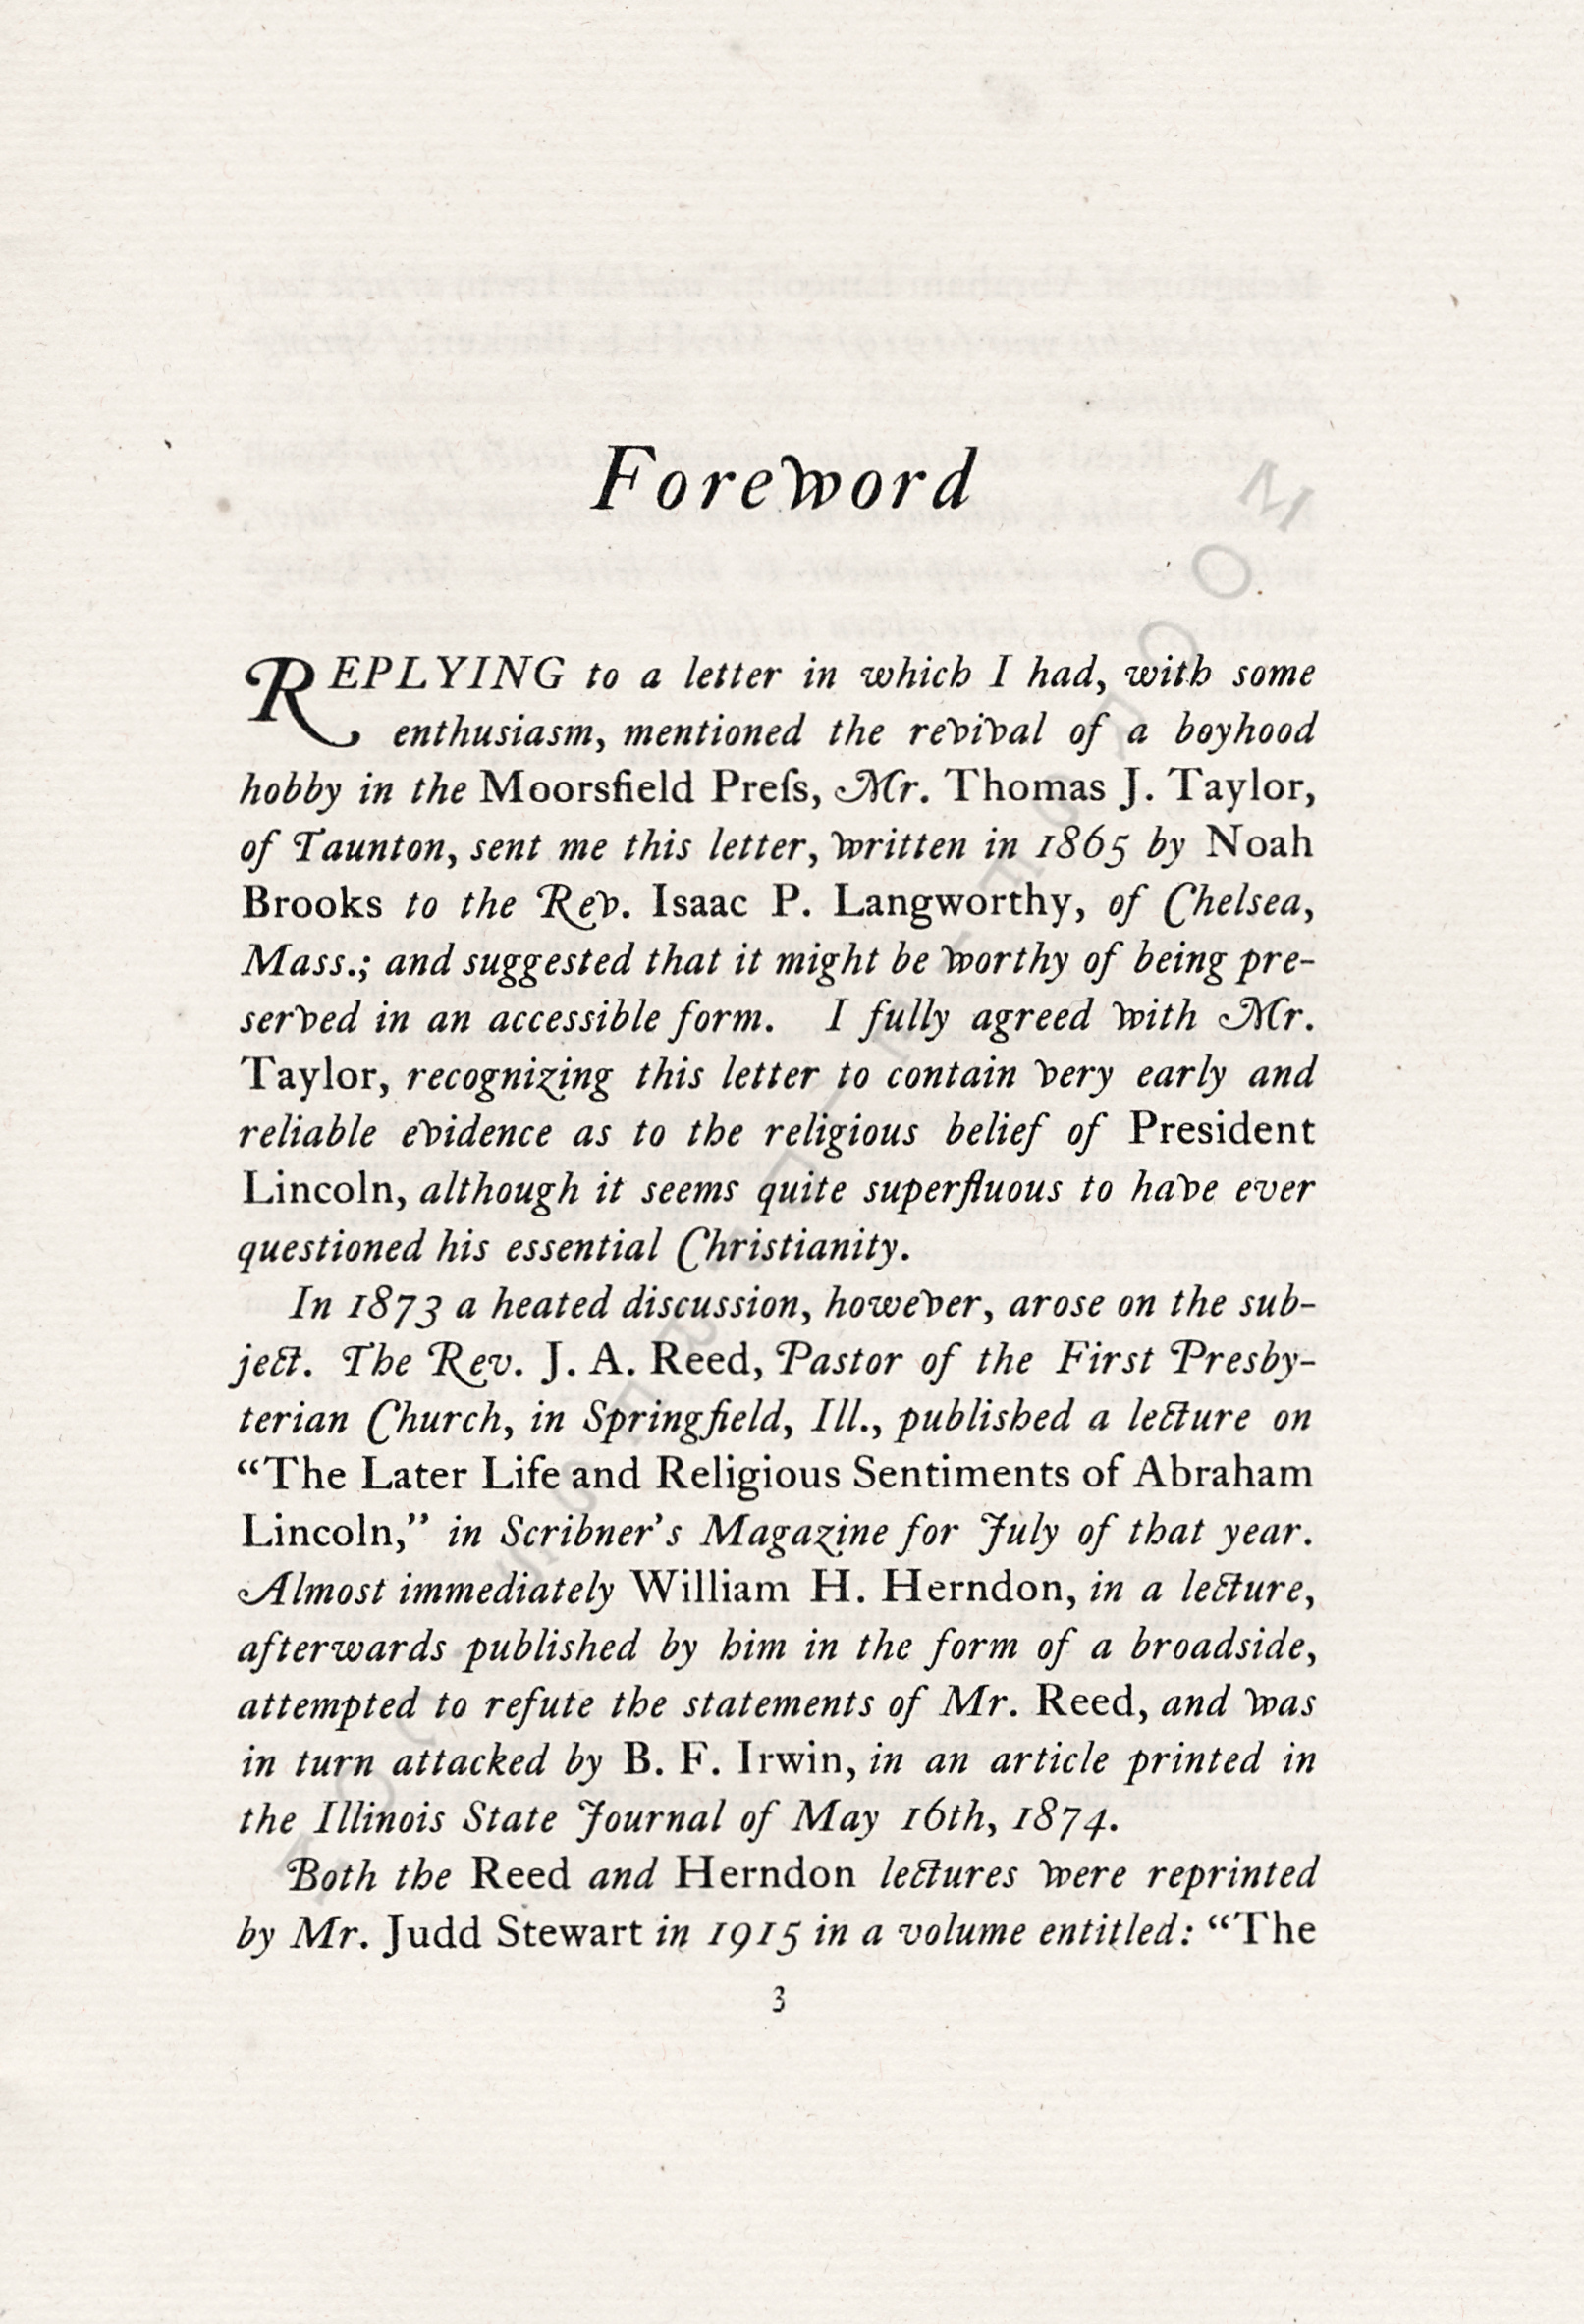 THE
                      CHARACTER AND RELIGION OF PRESIDENT LINCOLN - A
                      LETTER OF NOAH BROOKS MAY 10 1865